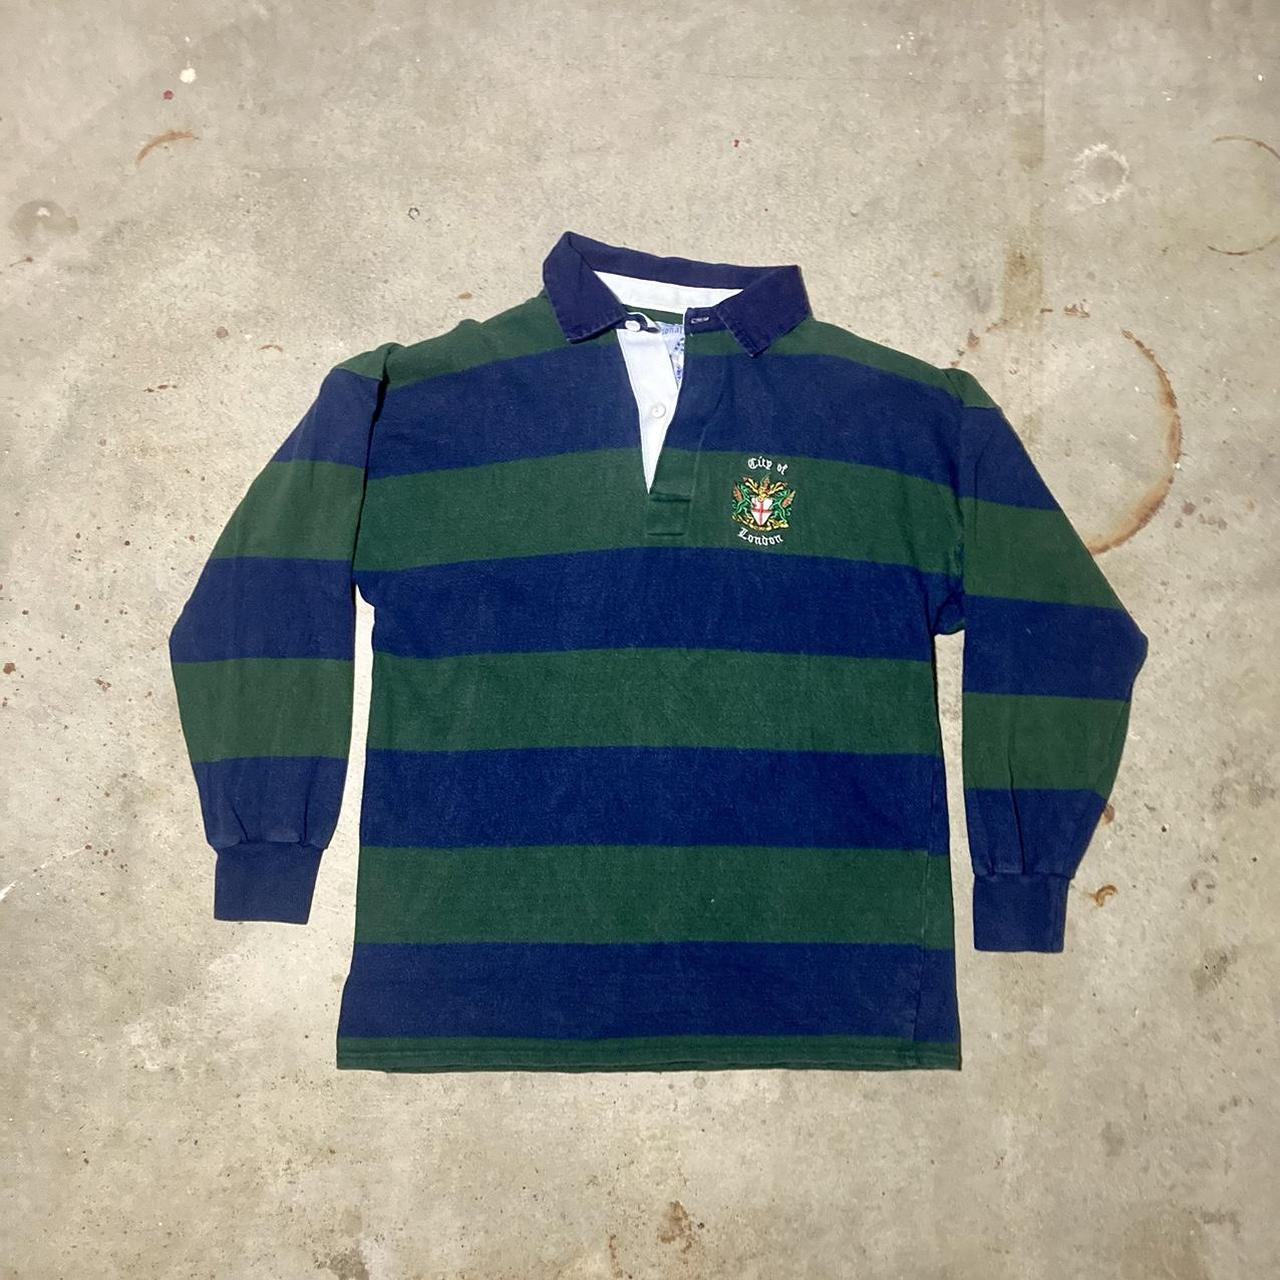 Men's Navy and Green Polo-shirts | Depop